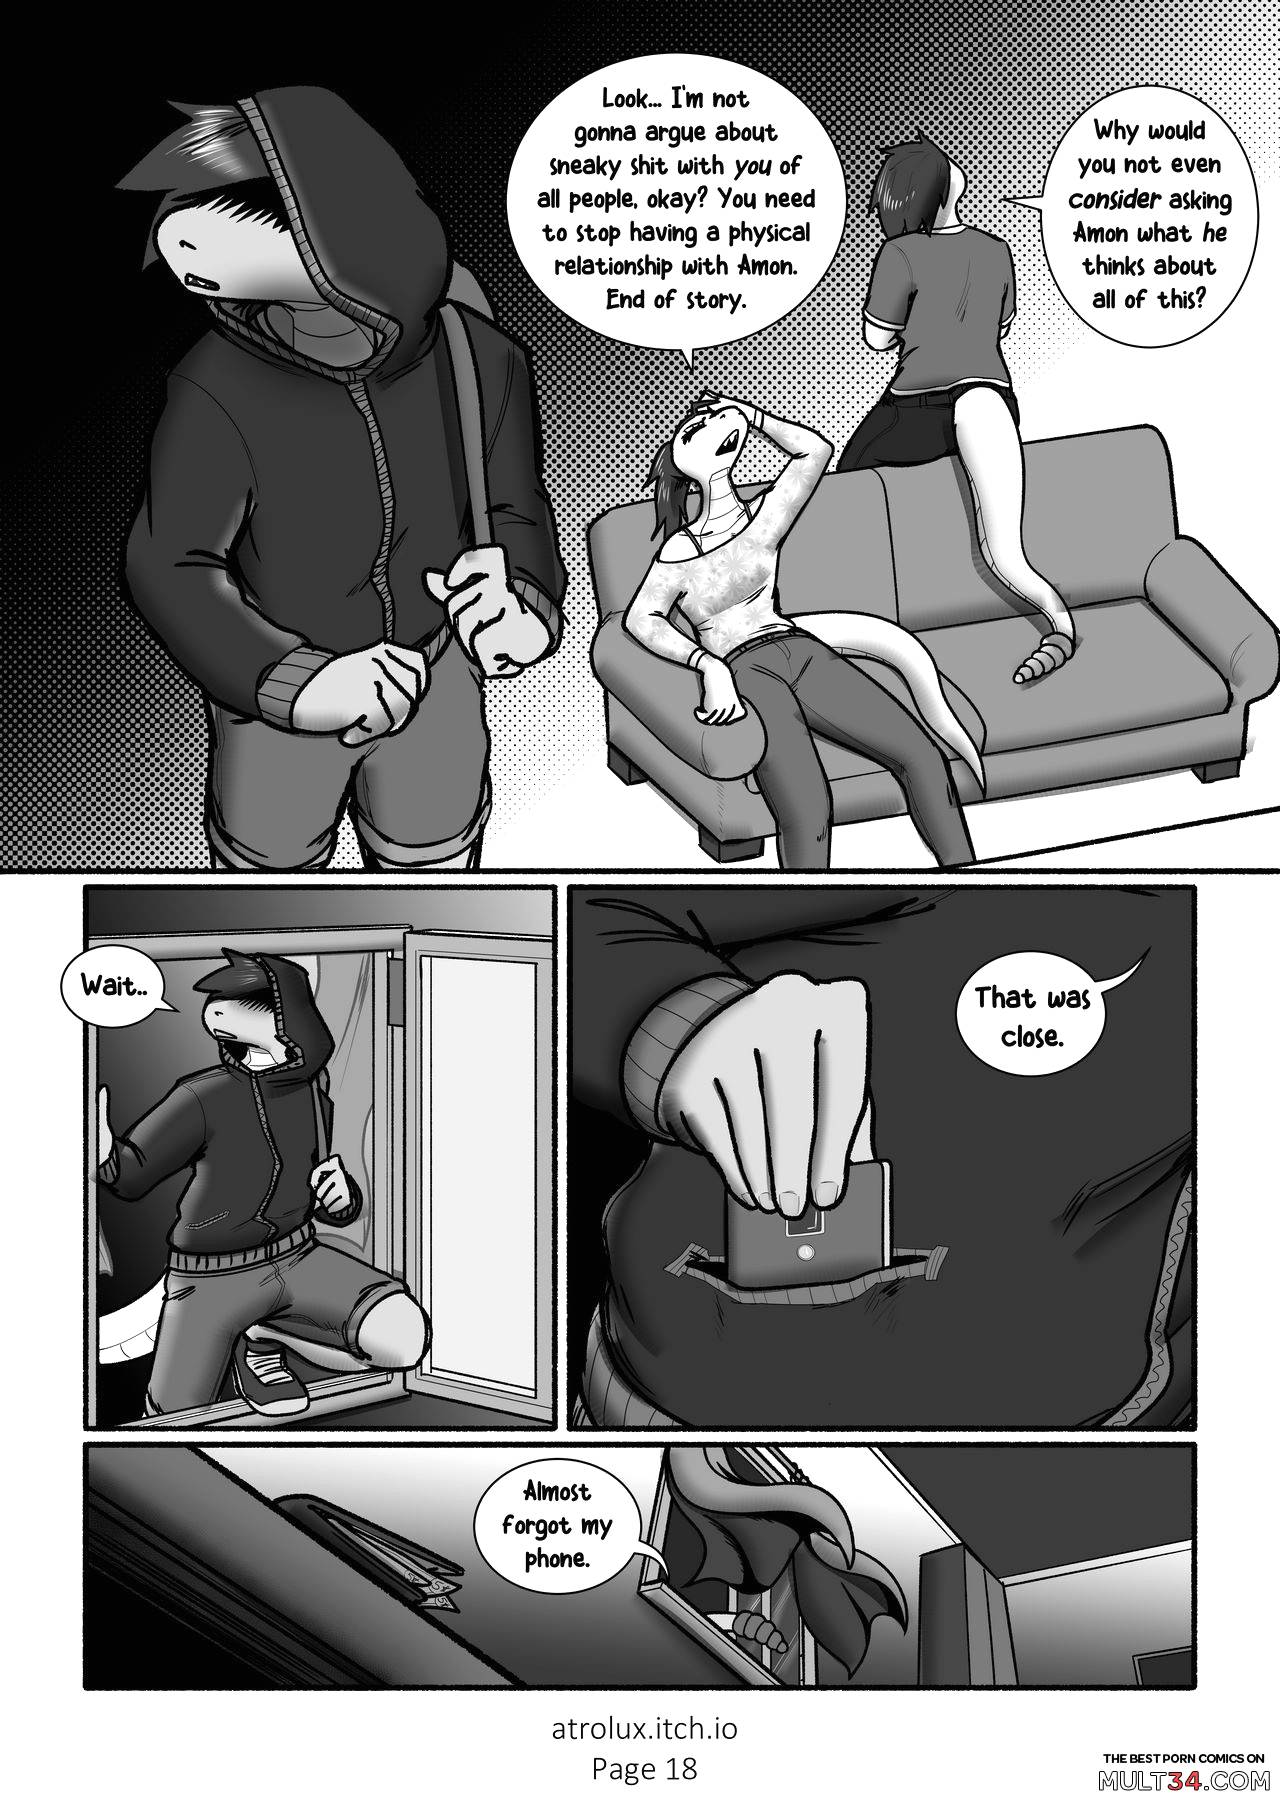 Shedding Inhibitions 6 - Feigned Innocence page 21